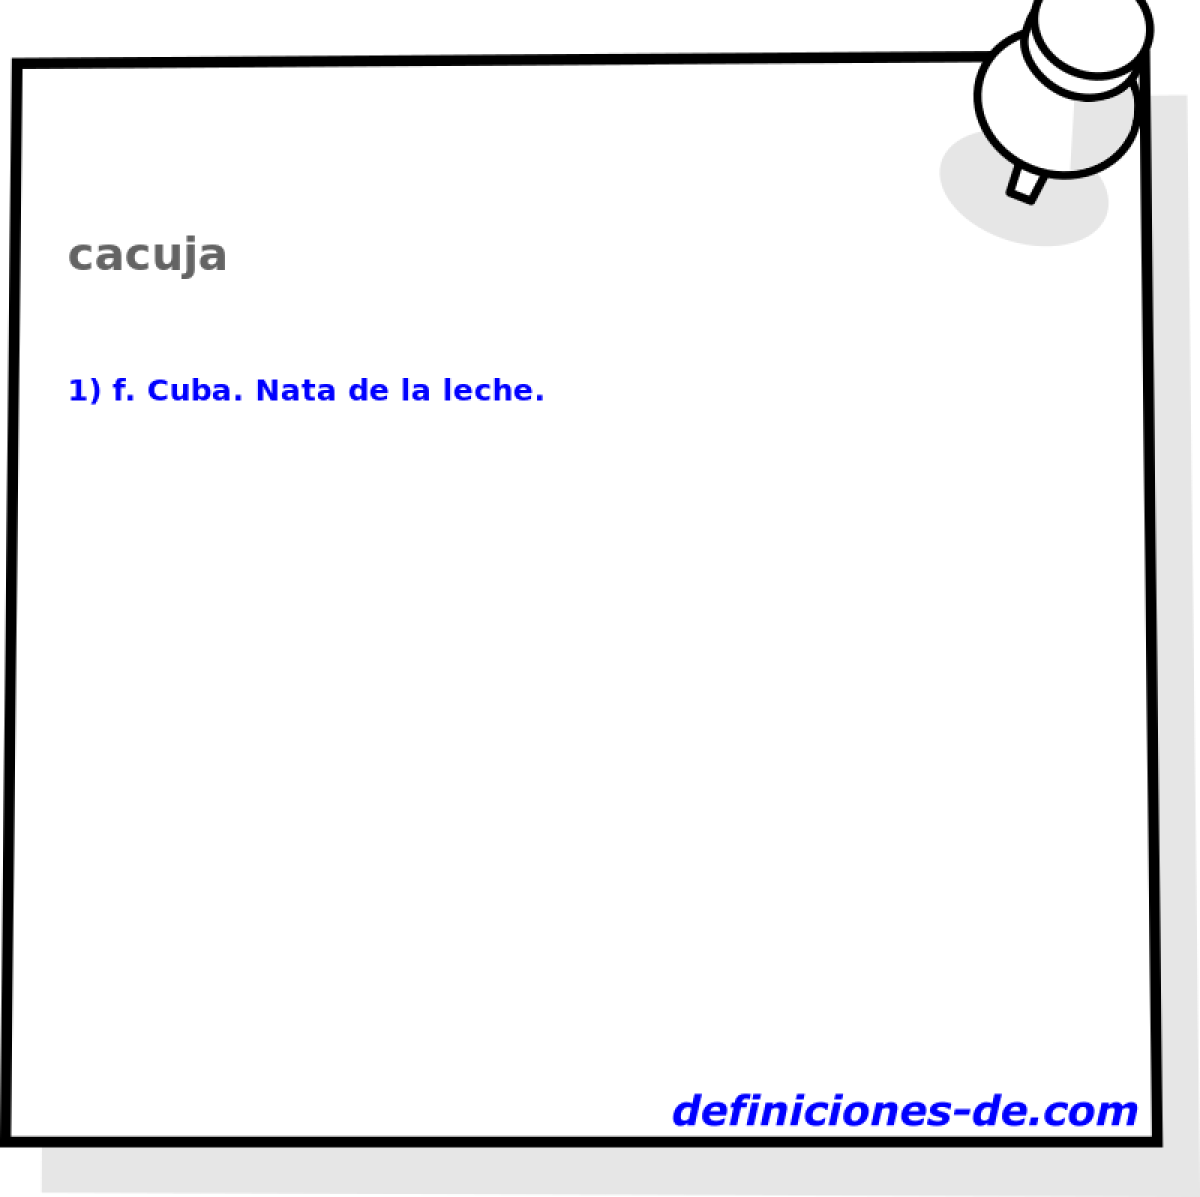 cacuja 